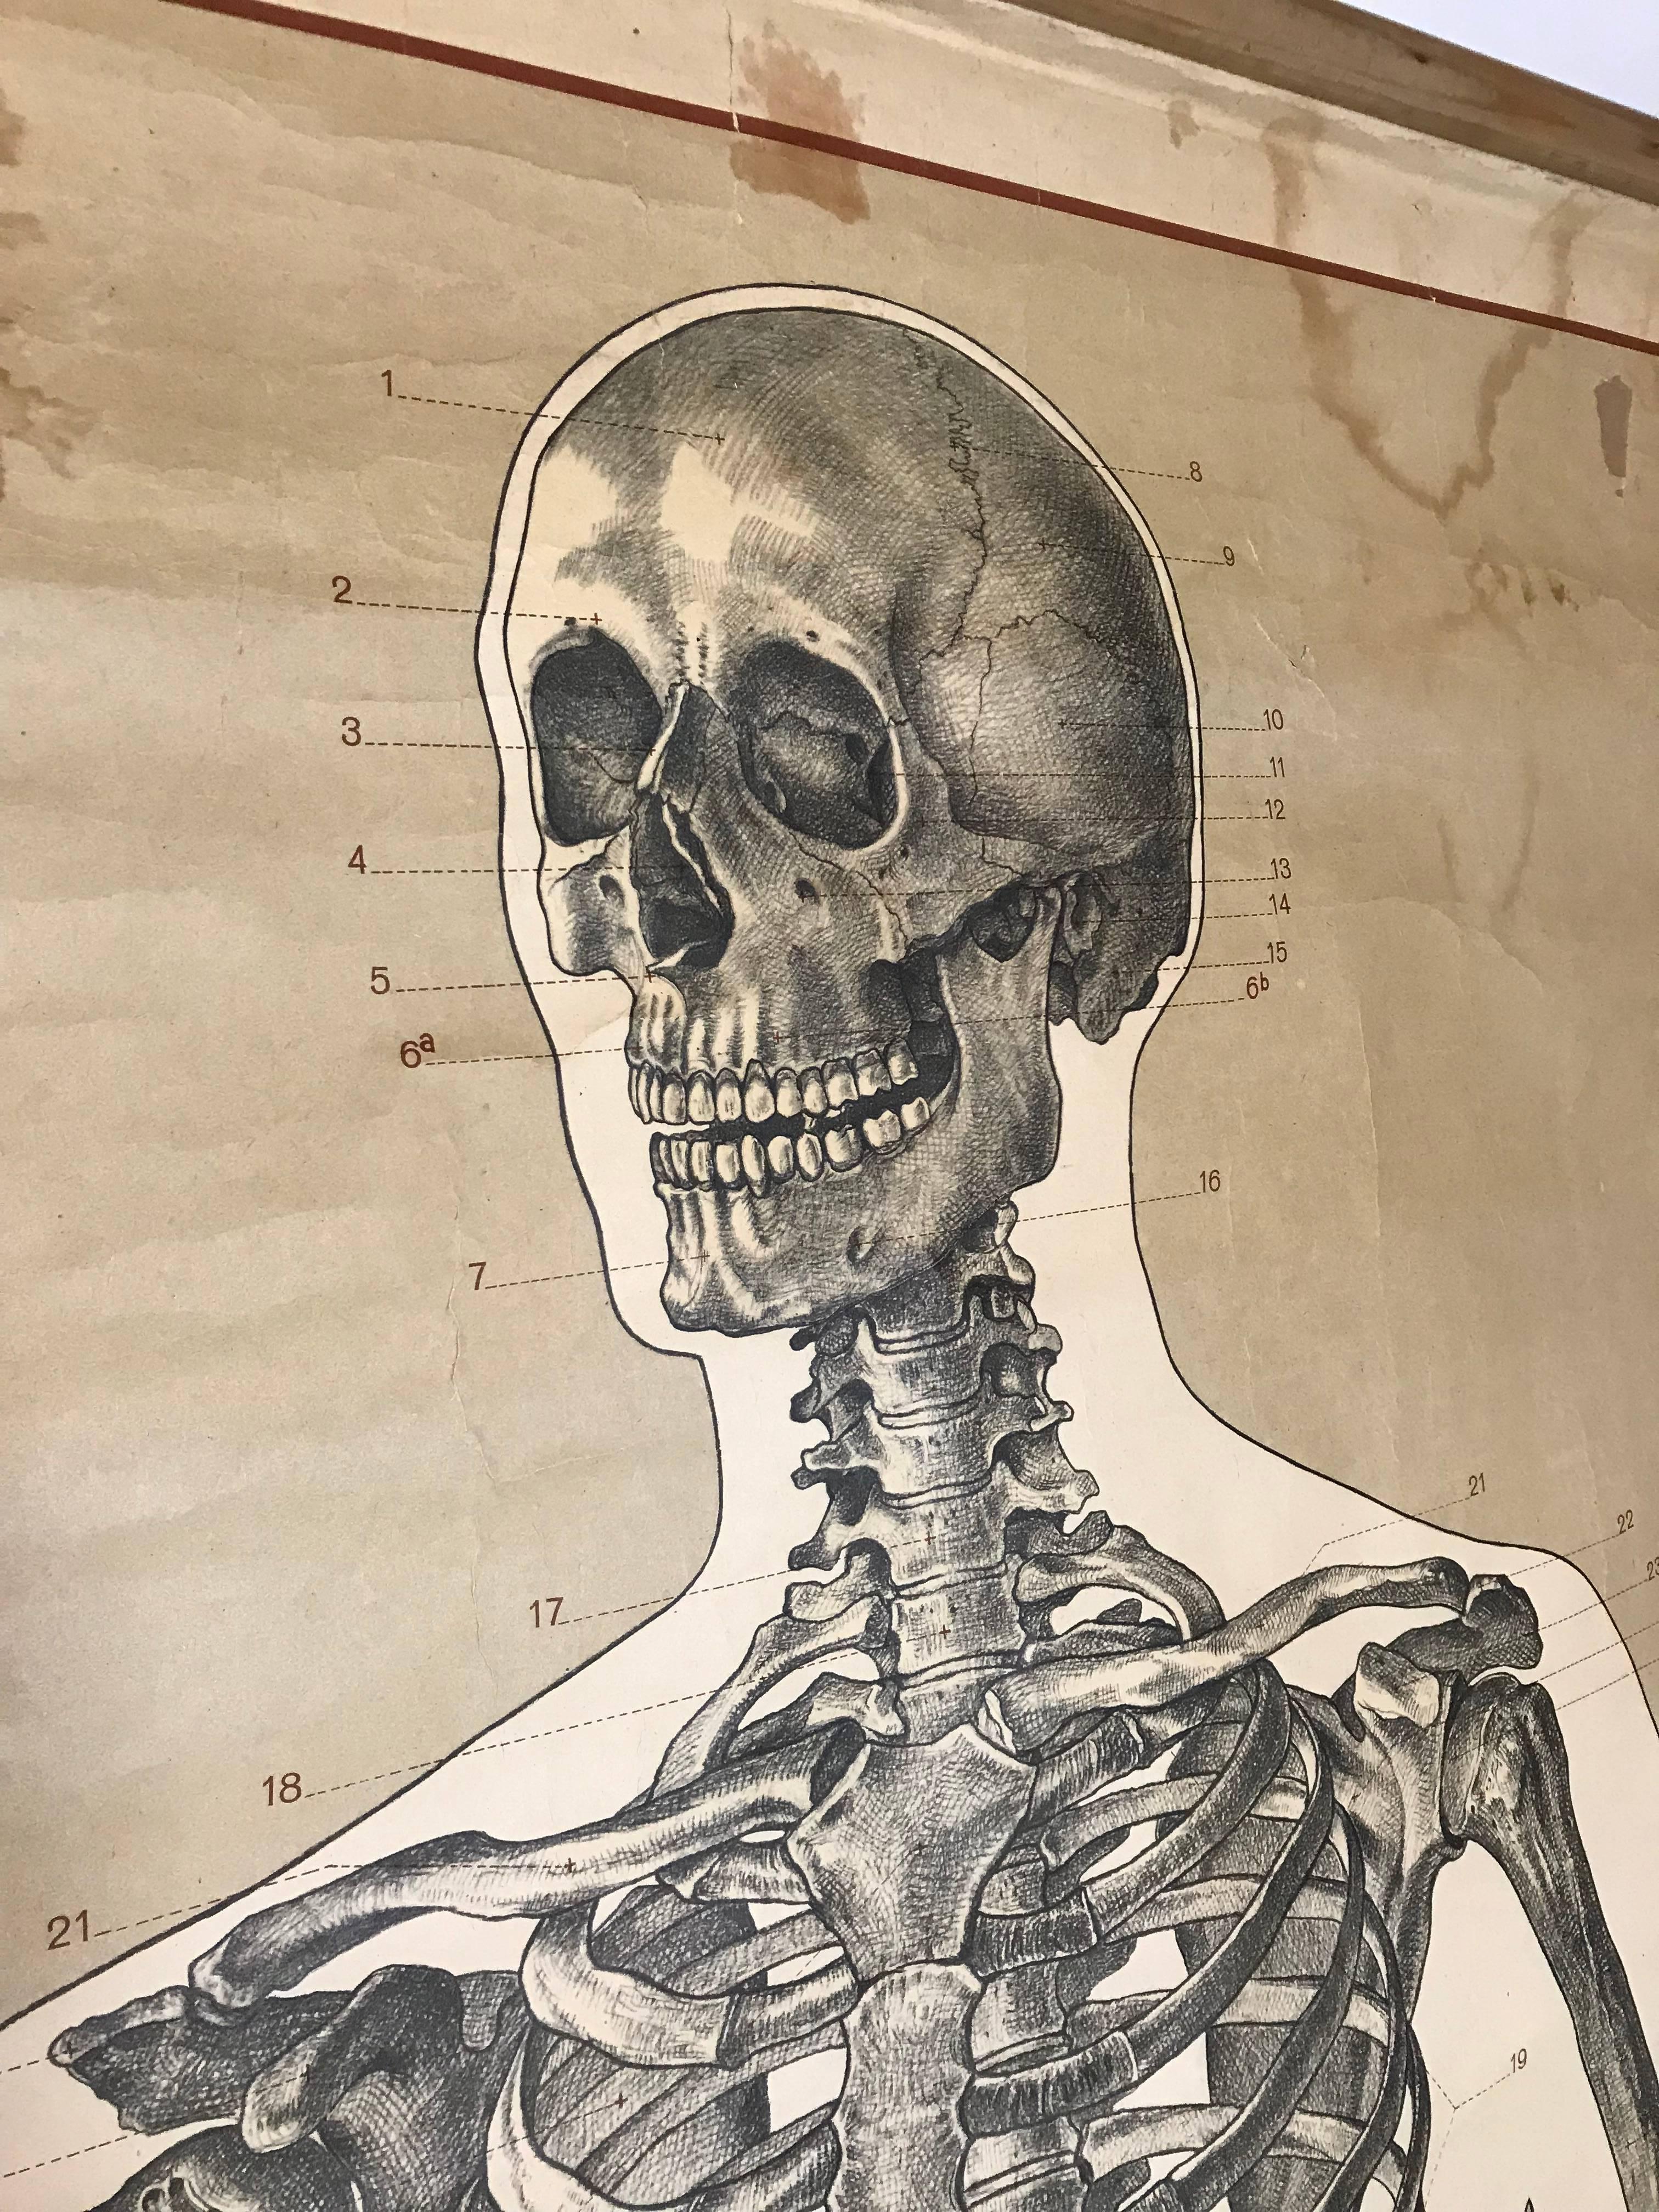 Vintage pull-down anatomical human chart, print of a painting for Original Deutsches Hygiene-Museum, Germany. The chart is part of the series: Biologisch-hygienisches Unterichtswerk des Deutschen Gesuntheits-Museum. The chart is printed on paper and